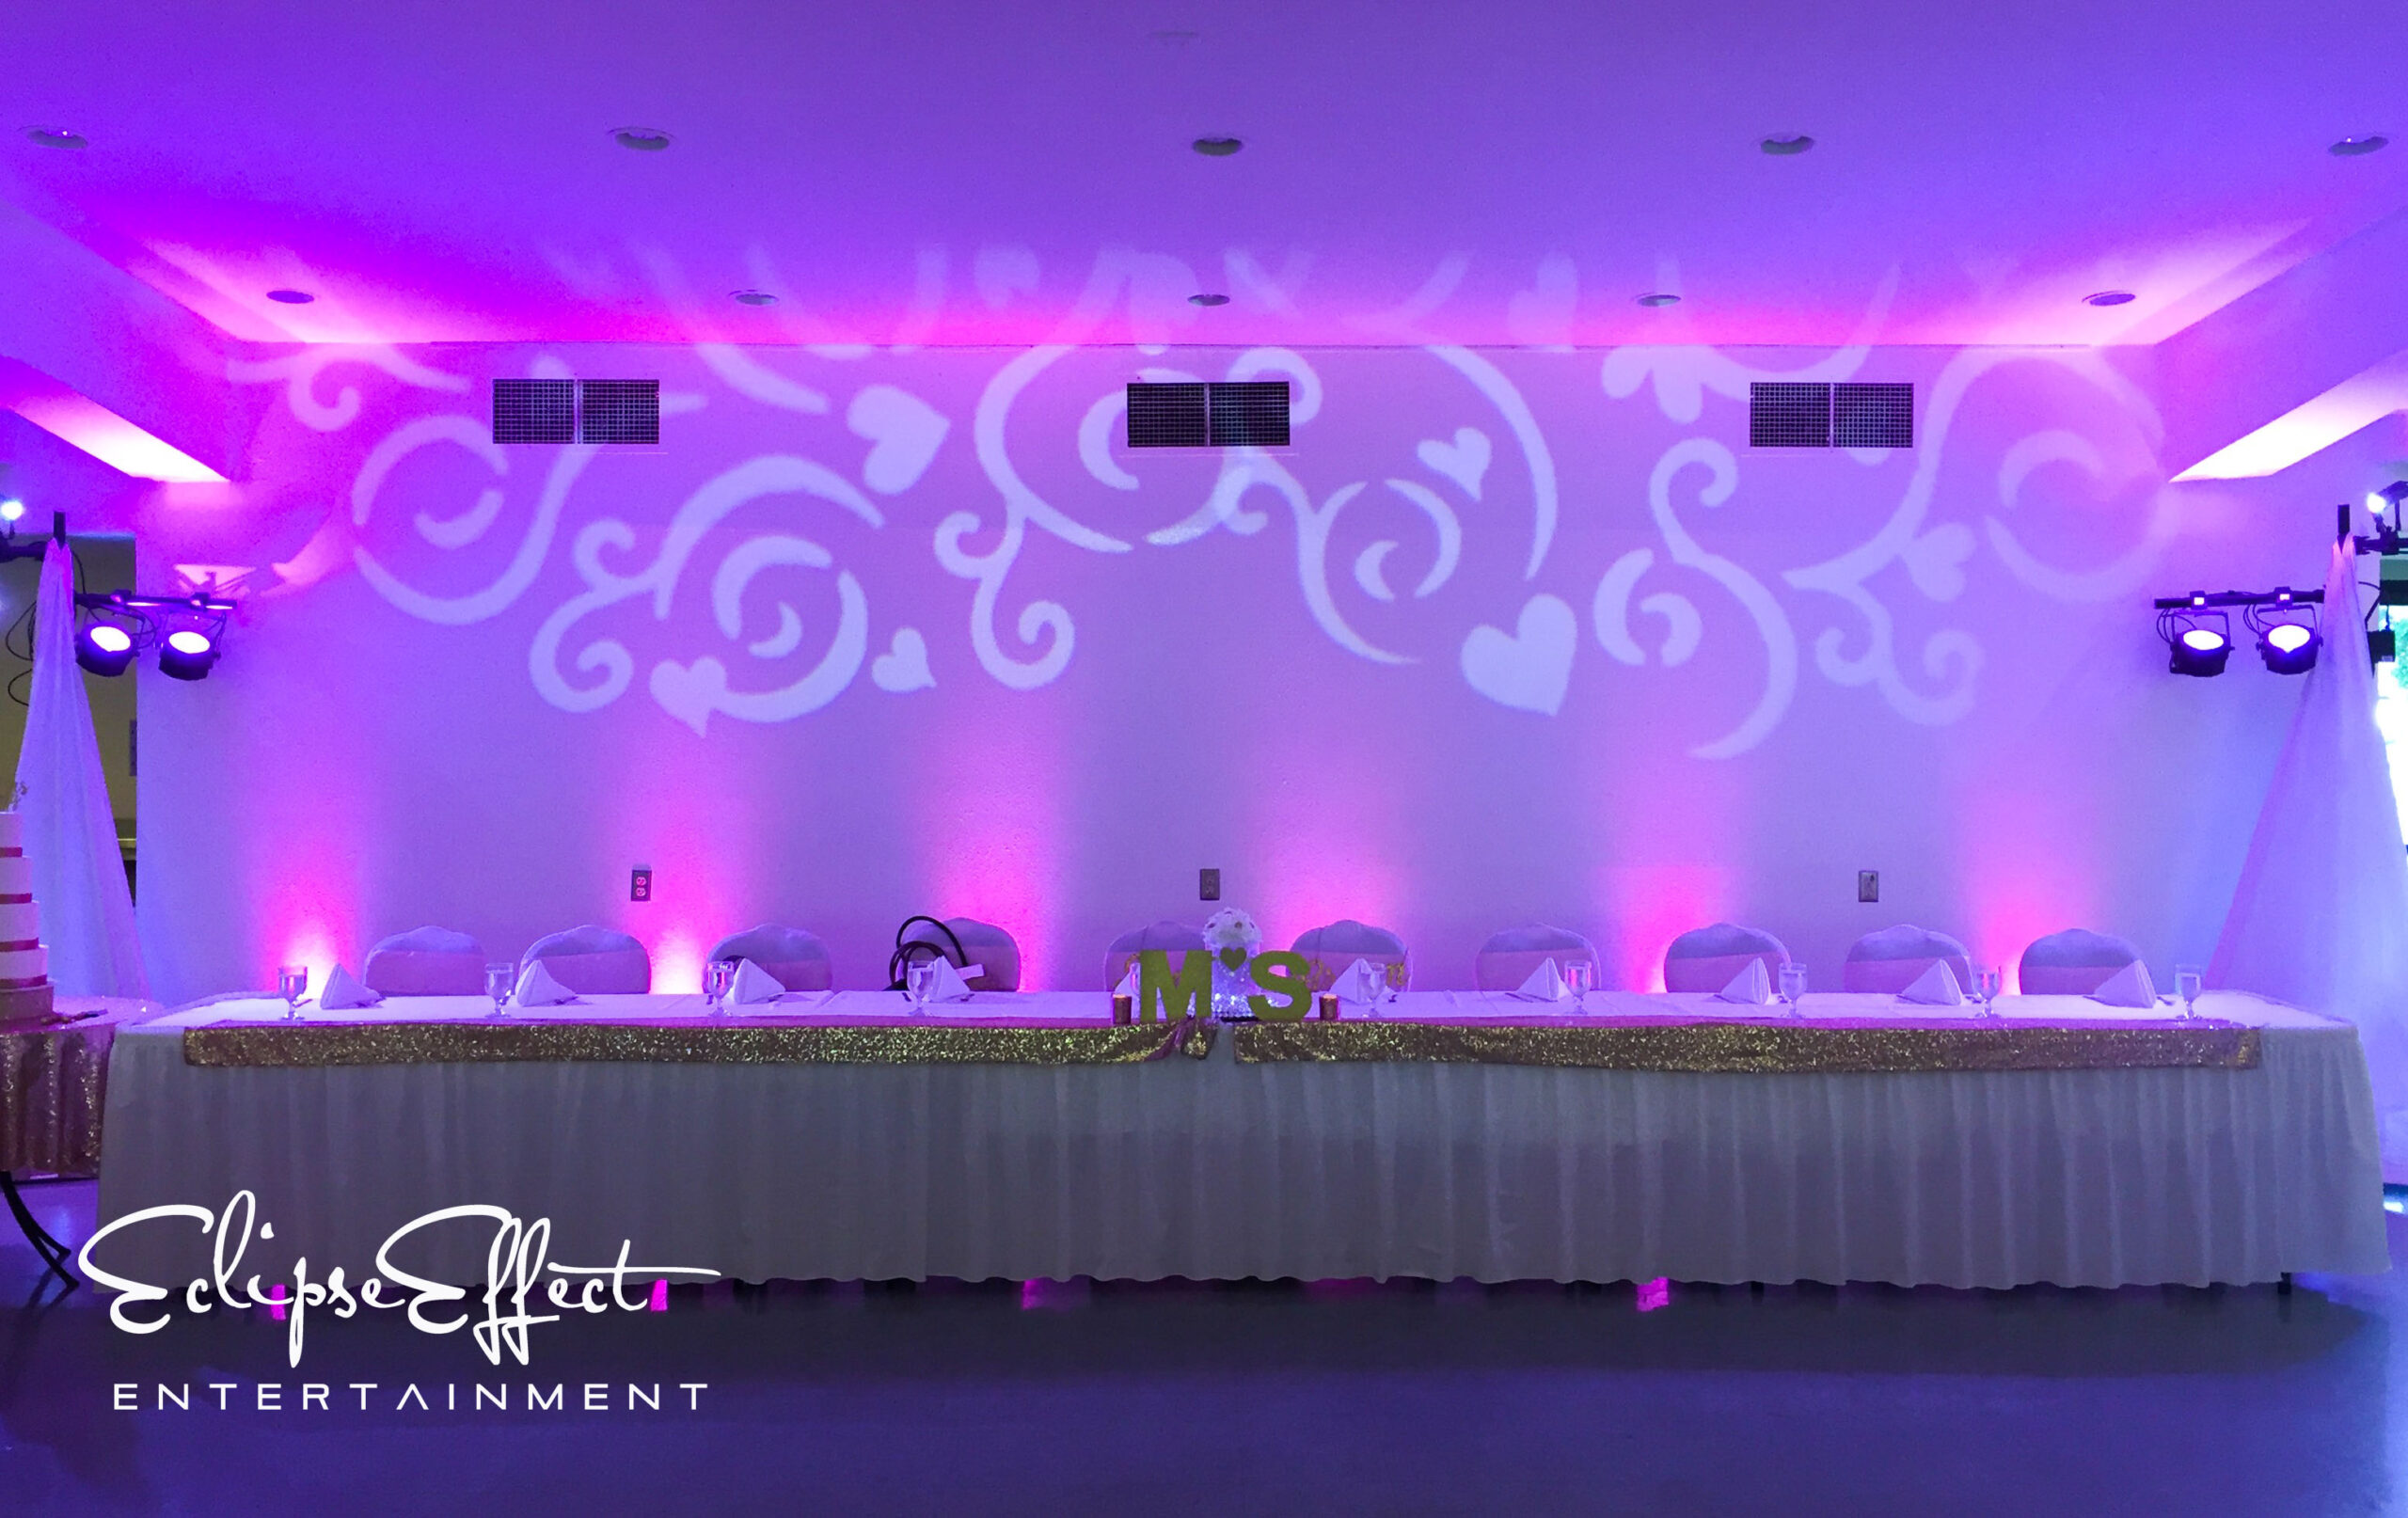 Head table uplighting with a monogram design.